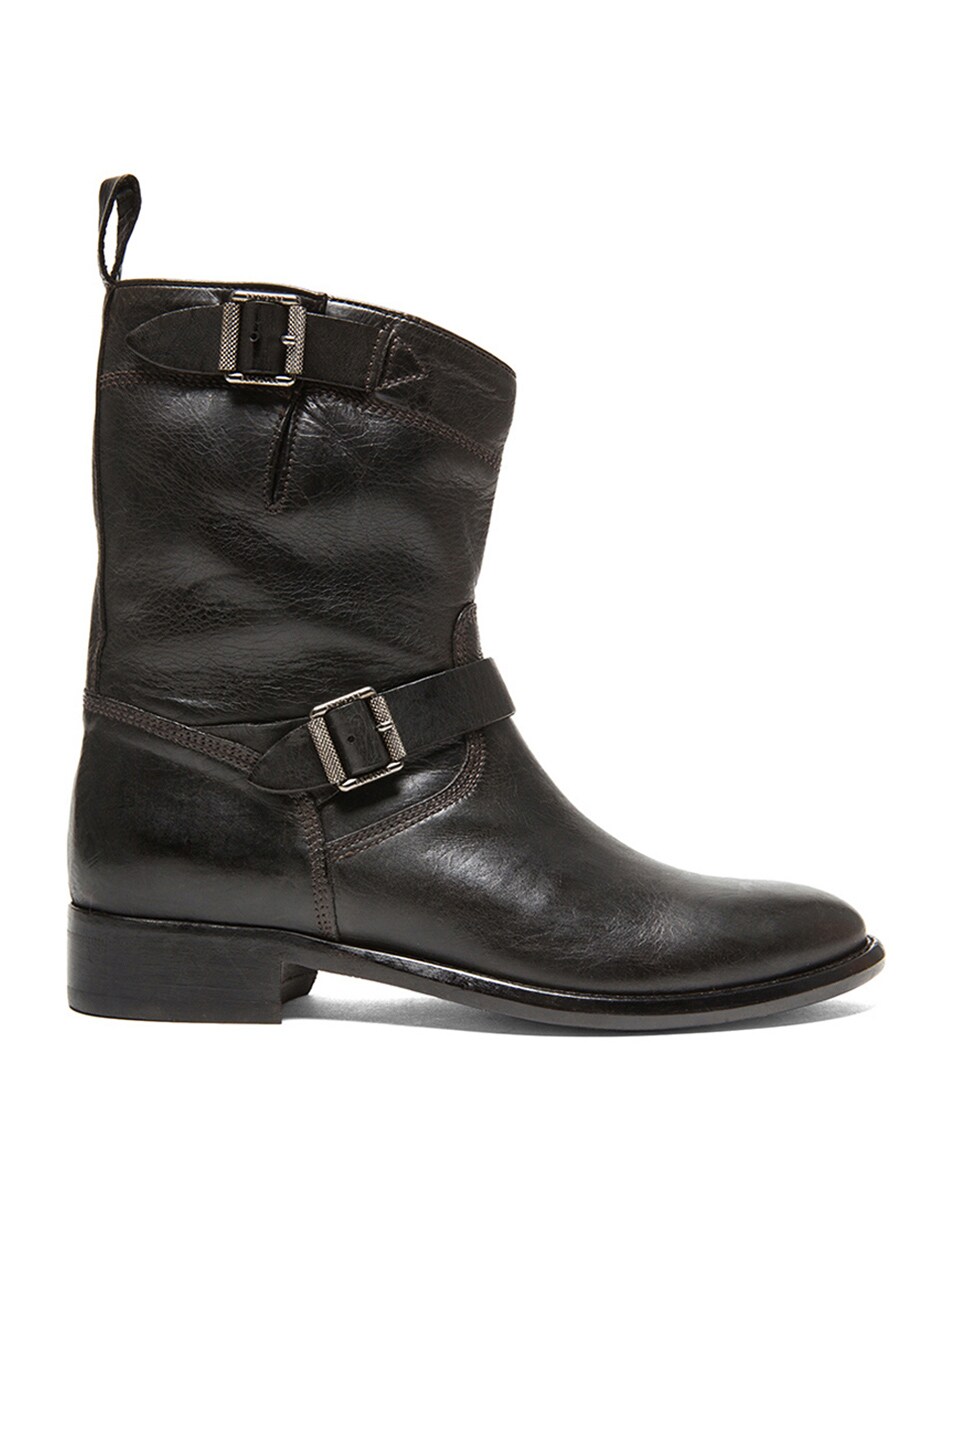 Belstaff Bedford Handwaxed Leather Boots in Black | FWRD